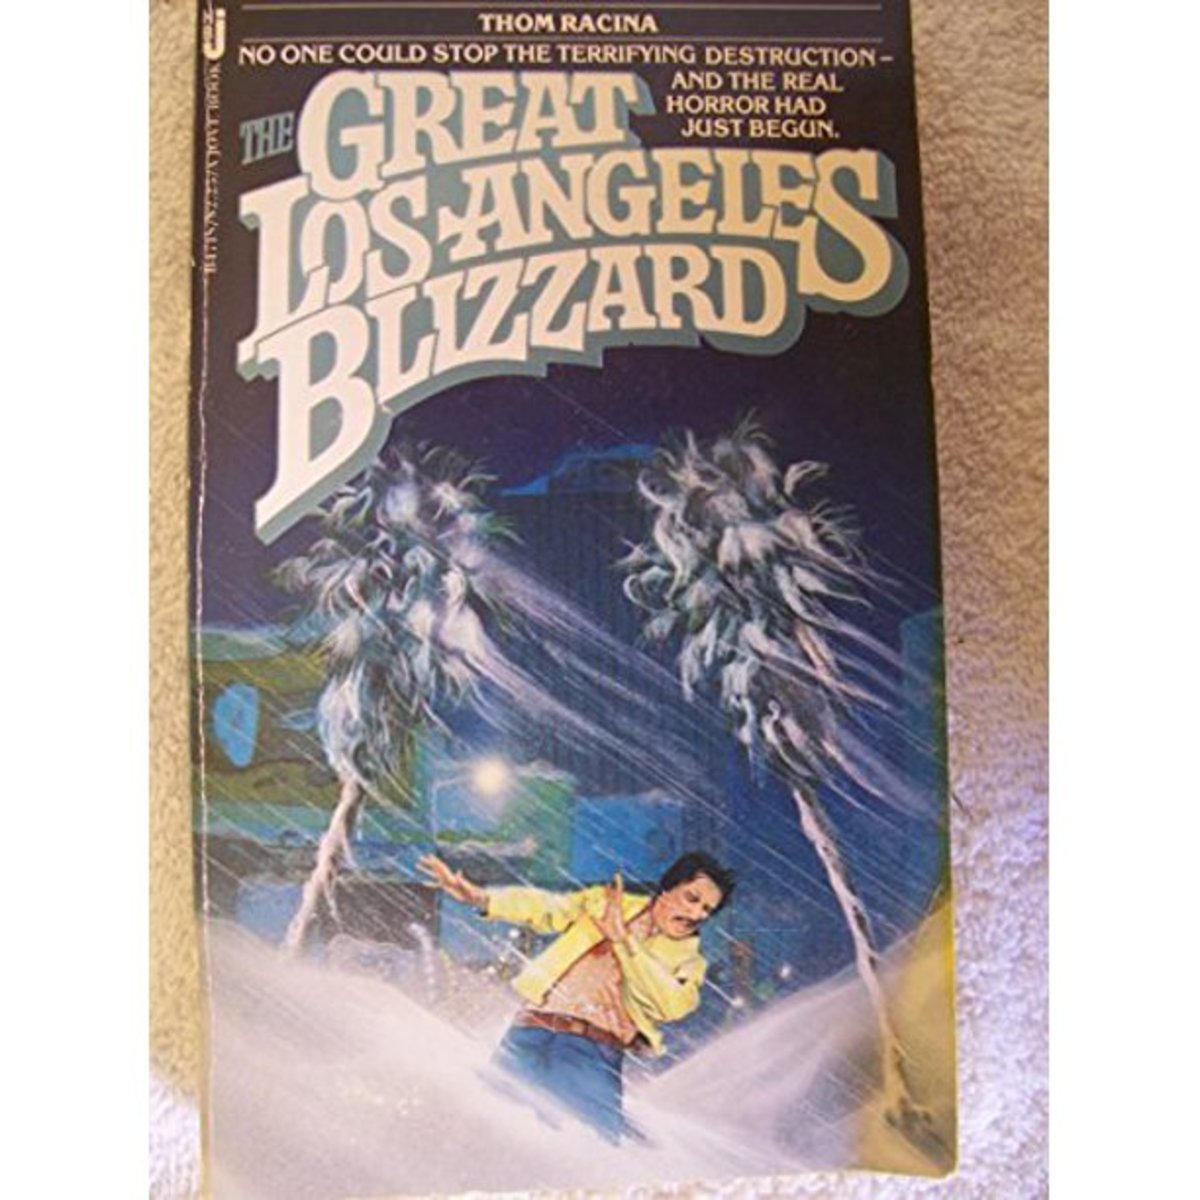 Retro Reading: The Great Los Angeles Blizzard by Thom Racina